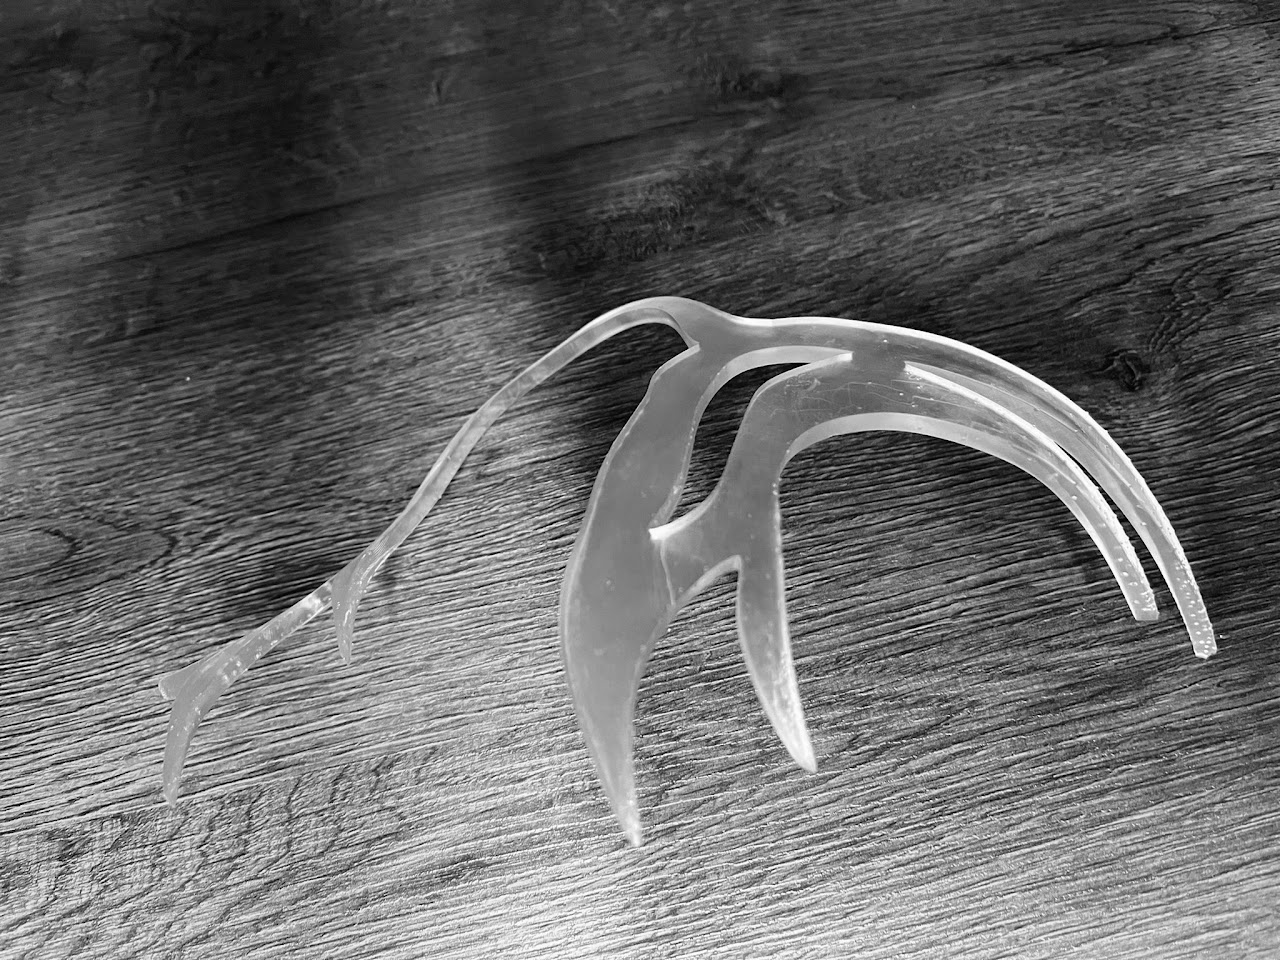 A 3d printed mask that is thin like a deer antler